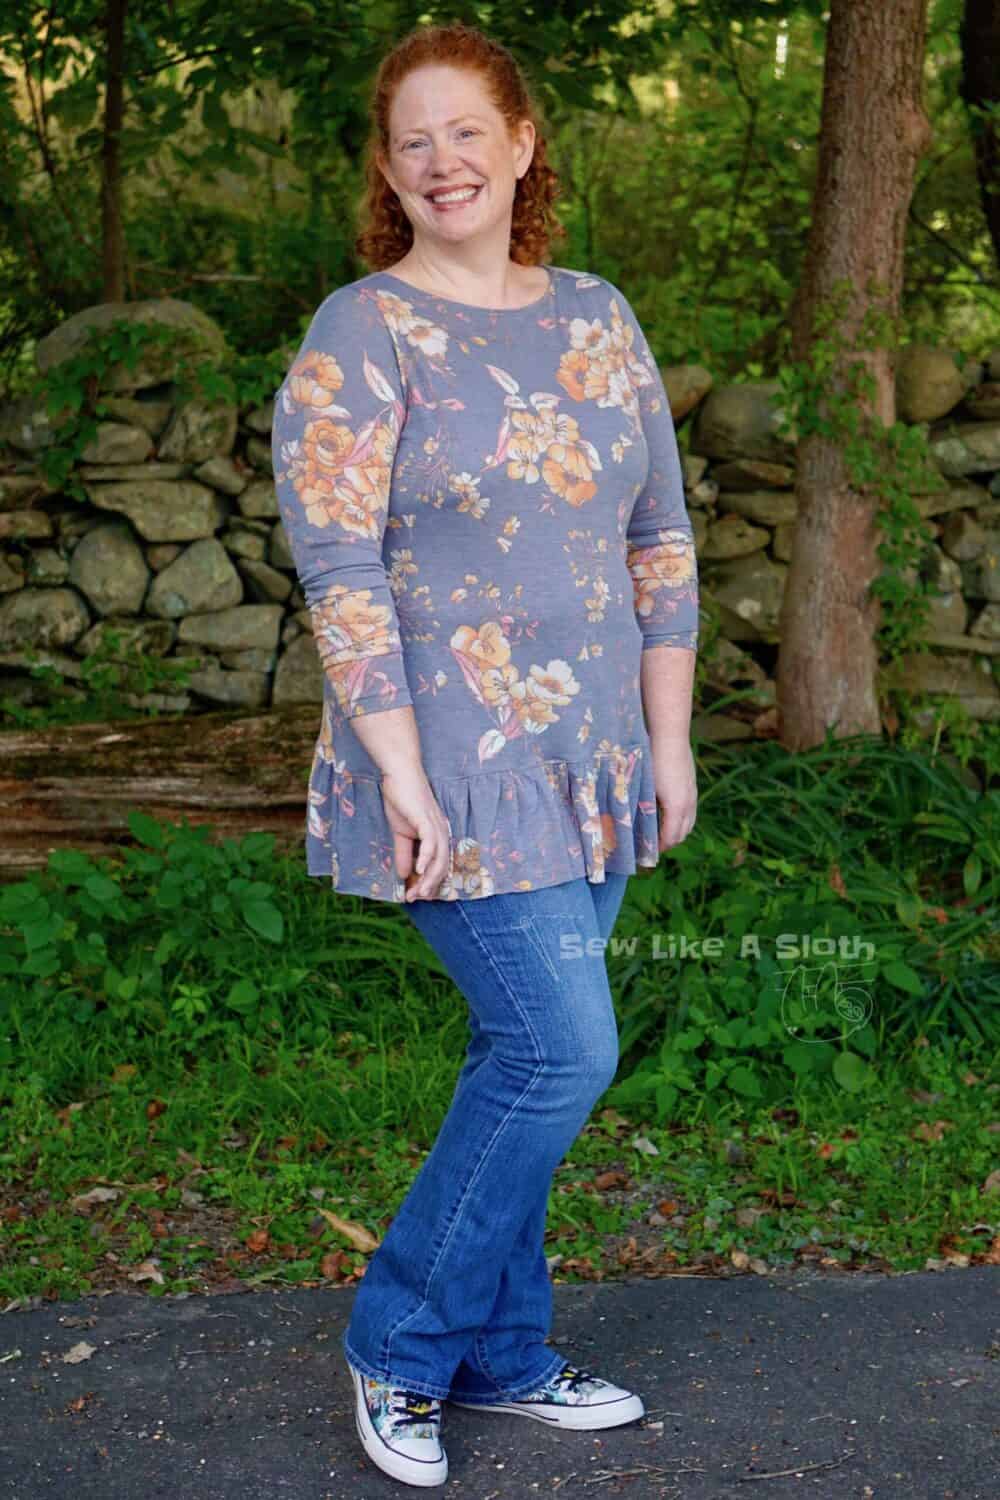 Tabitha with a Twist, plus Retreat News - Love Notions Sewing Patterns